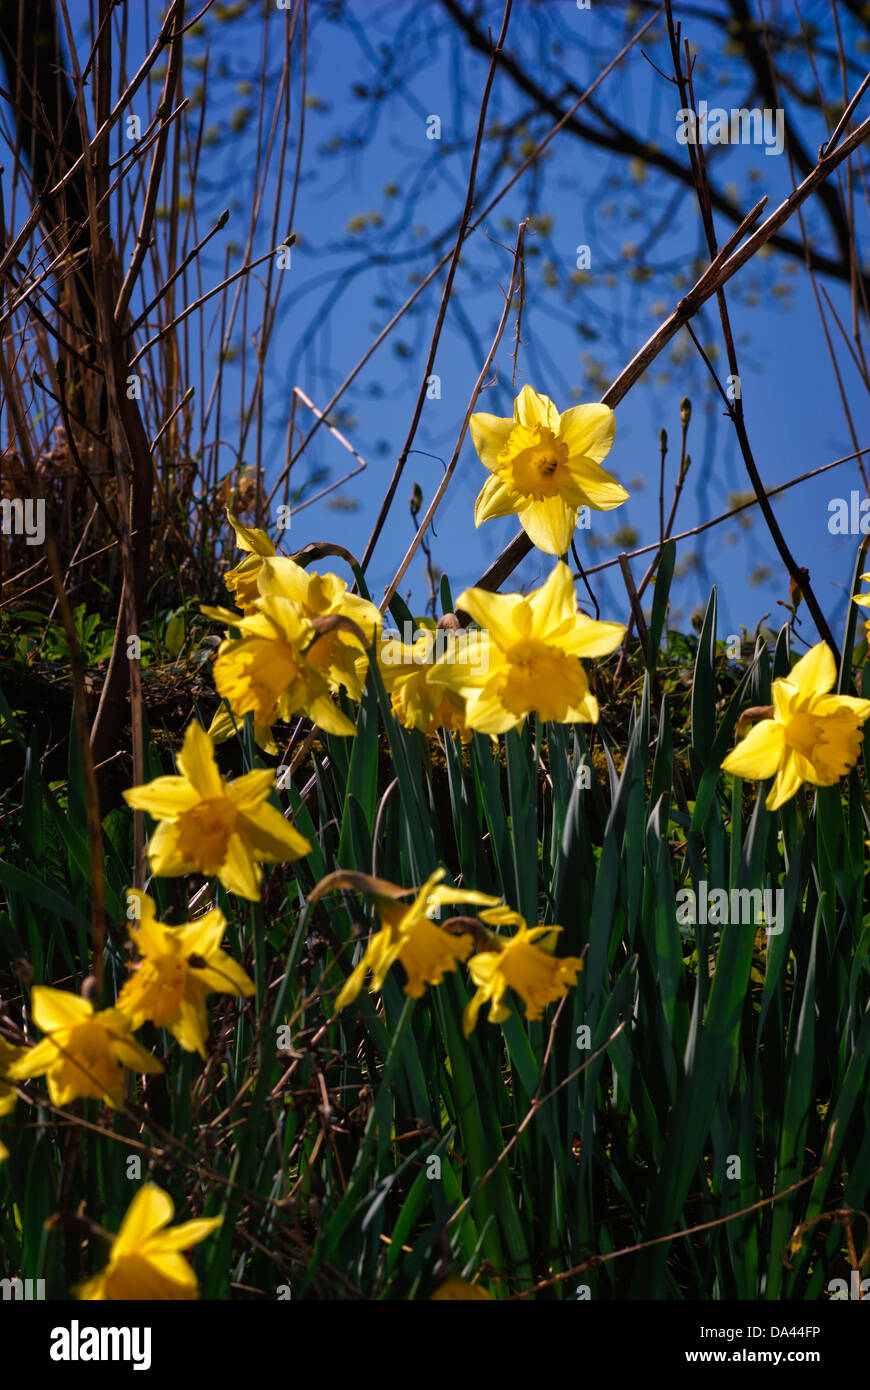 Daffodil in the early spring. Stock Photo